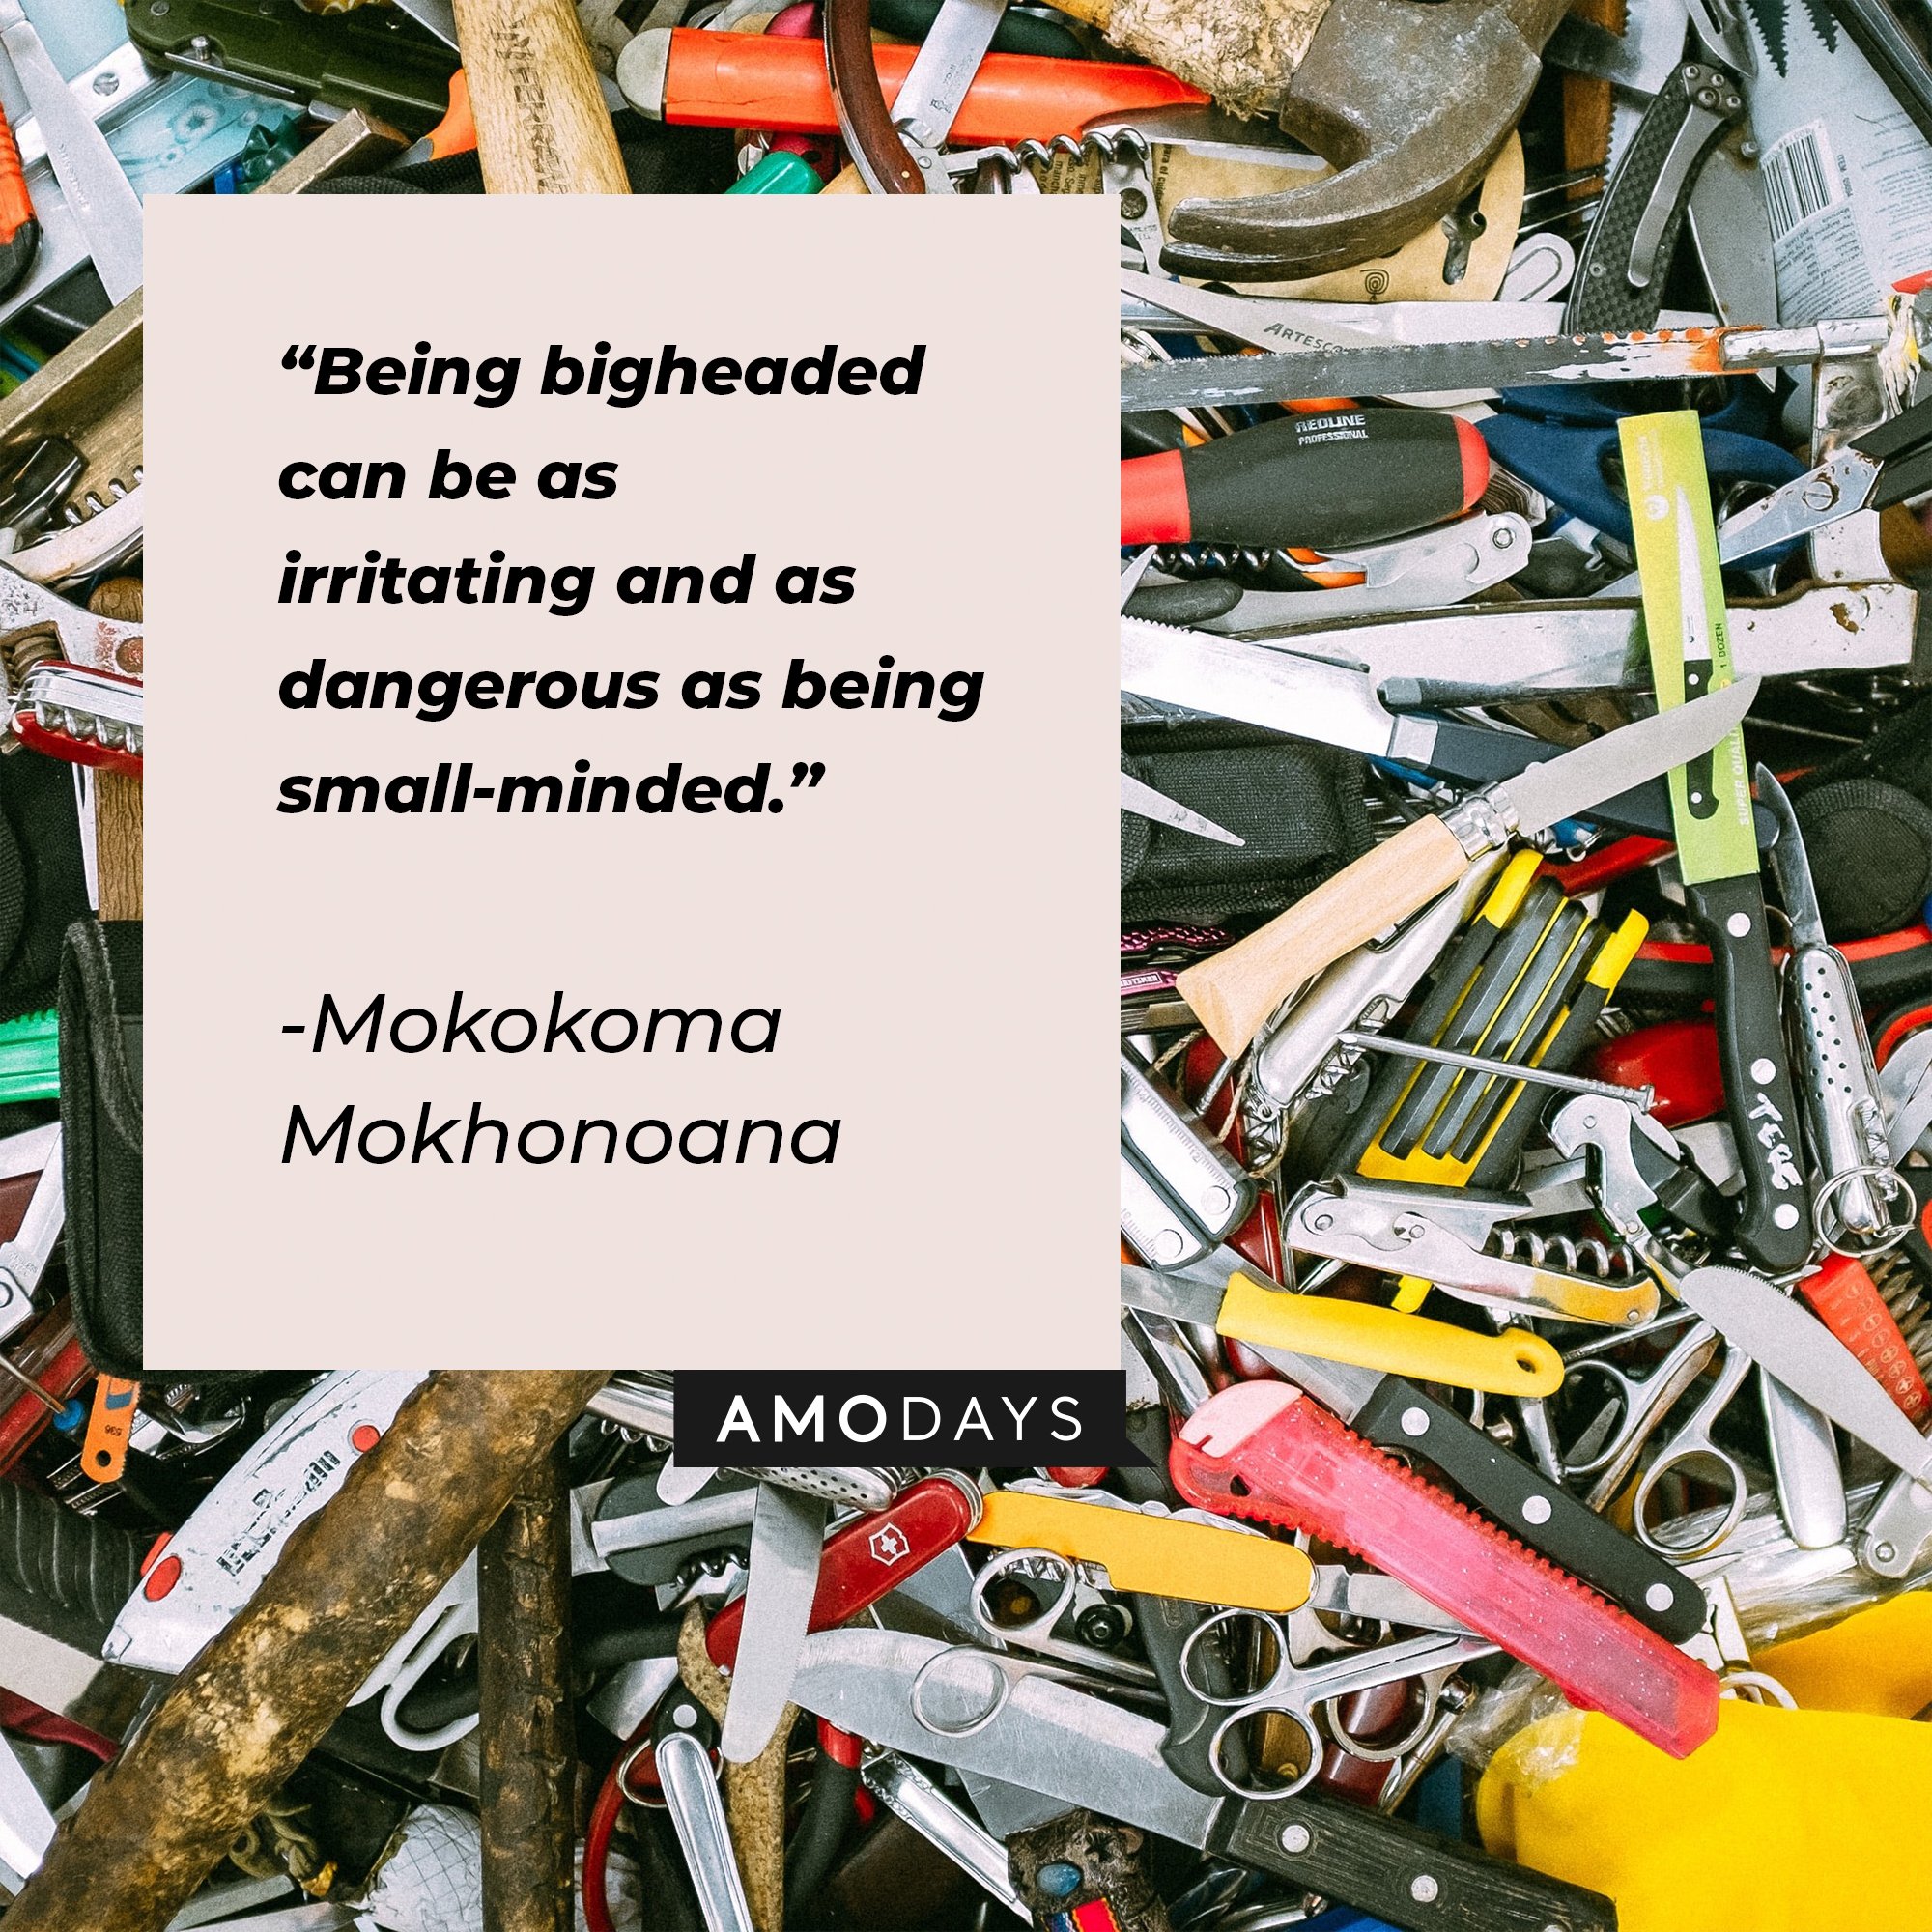 Mokokoma Mokhonoana's quote: "Being bigheaded can be as irritating and as dangerous as being small-minded." | Image: AmoDays